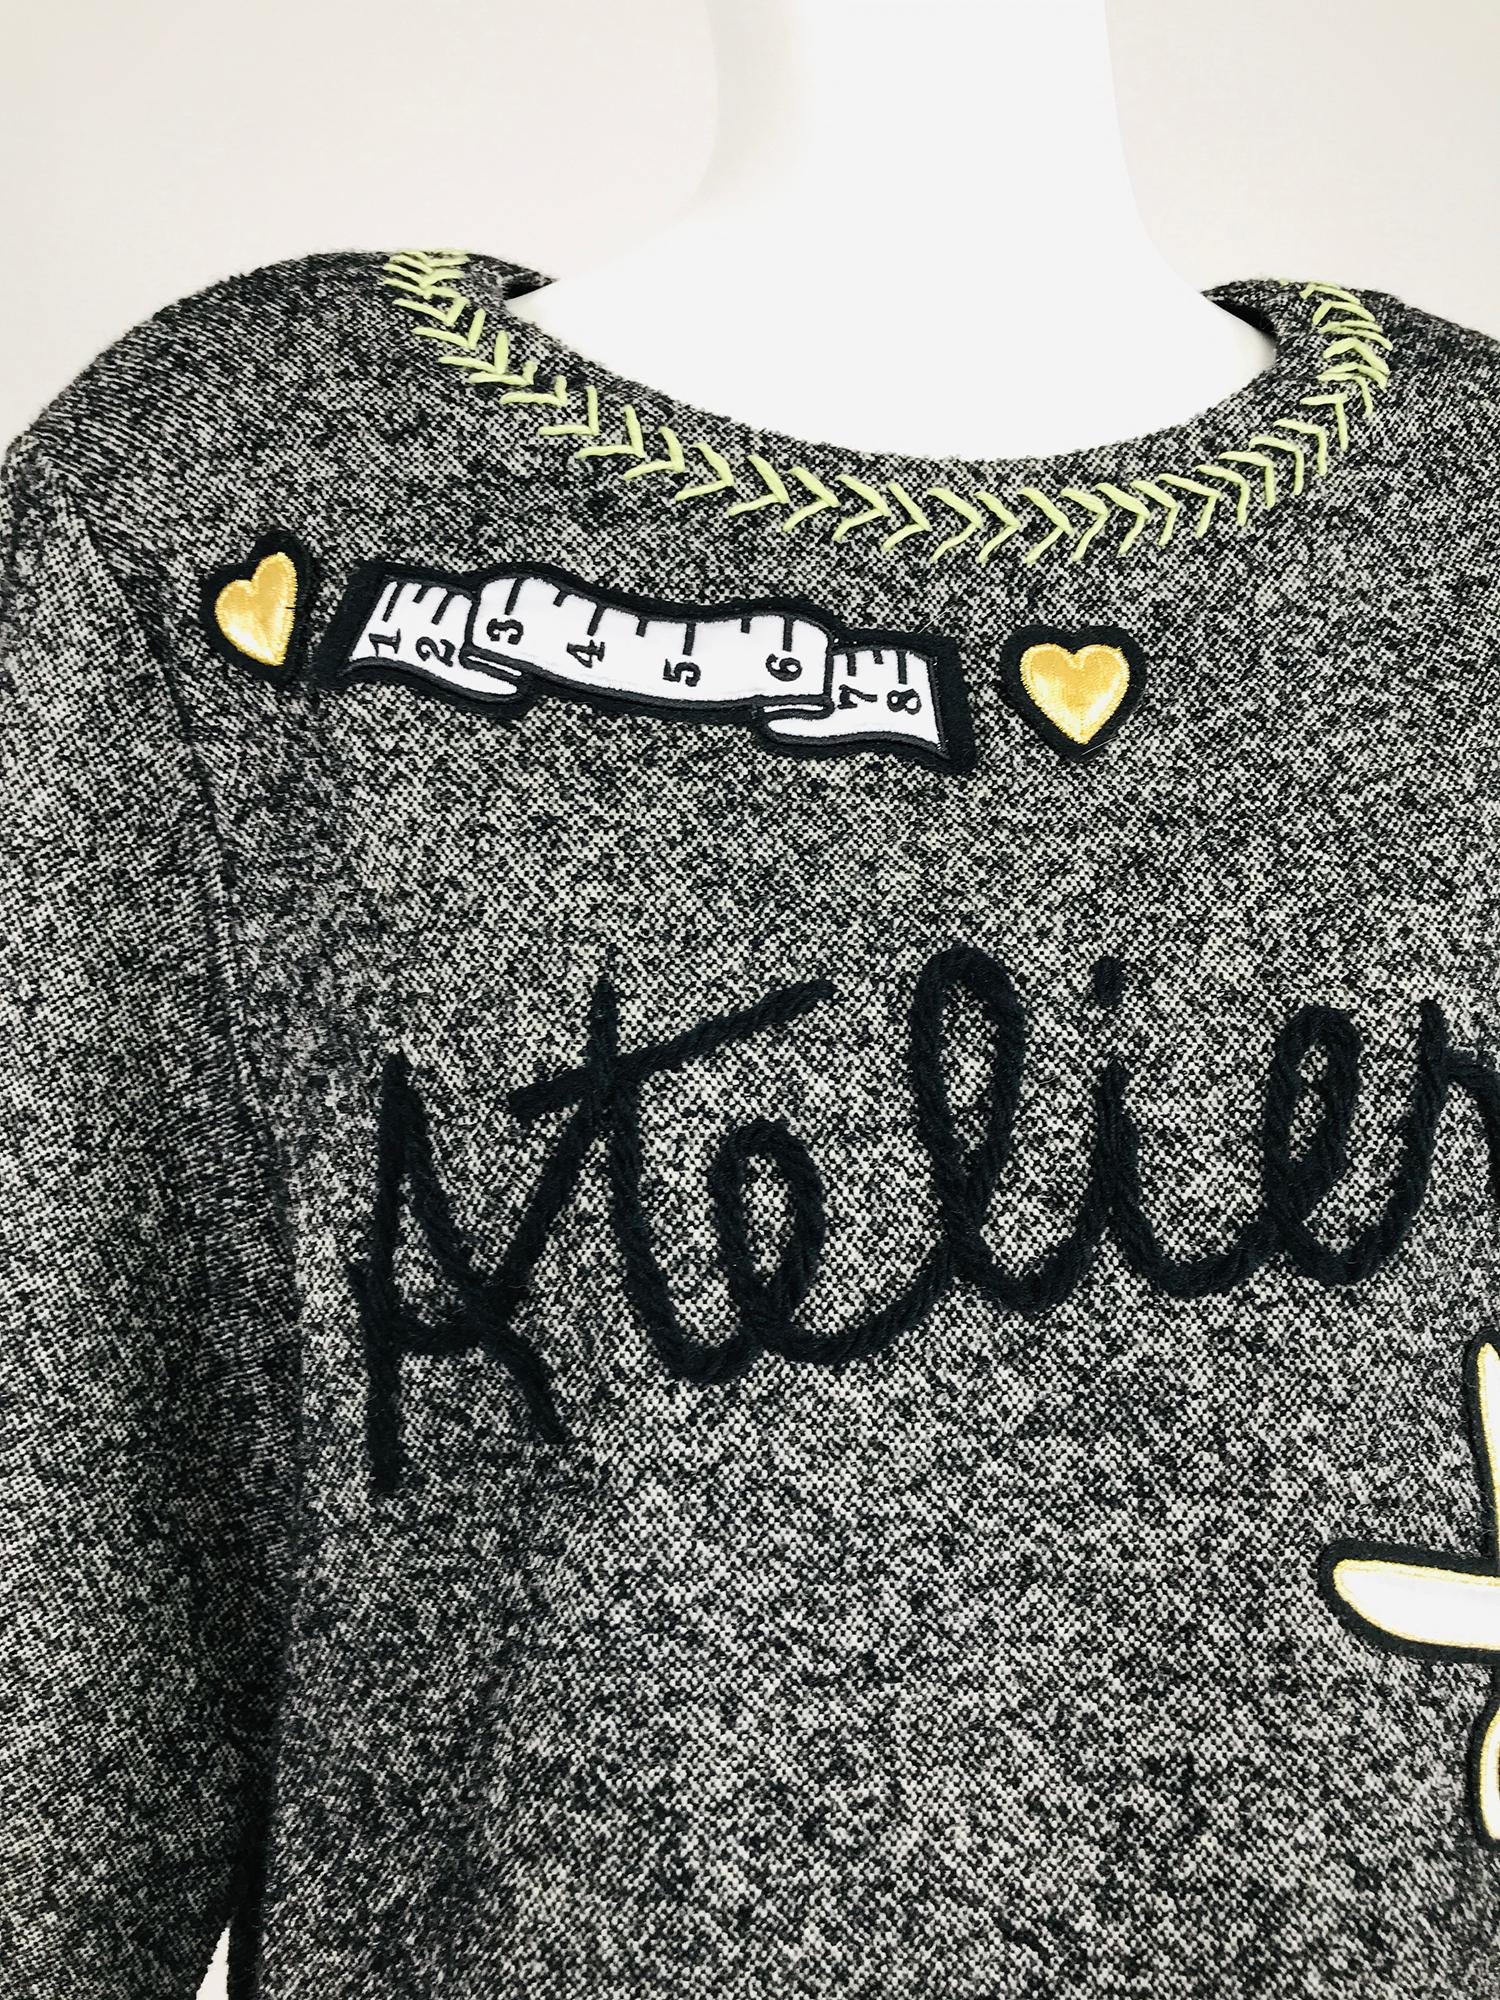 Moschino Cheap & Chic Atelier! Tweed Applique Top 5